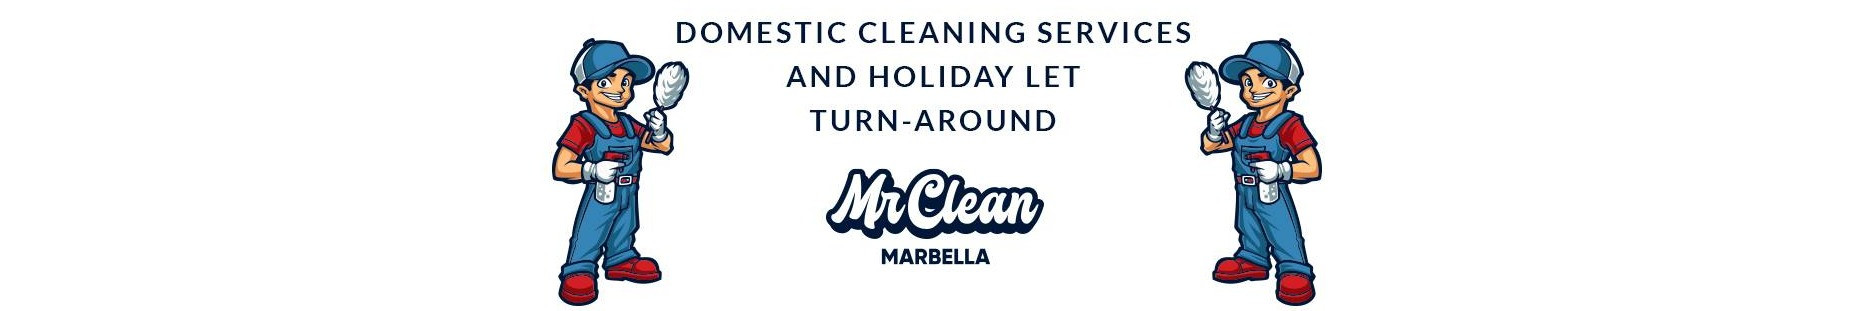 Domestic cleaning services and holiday let turnaround